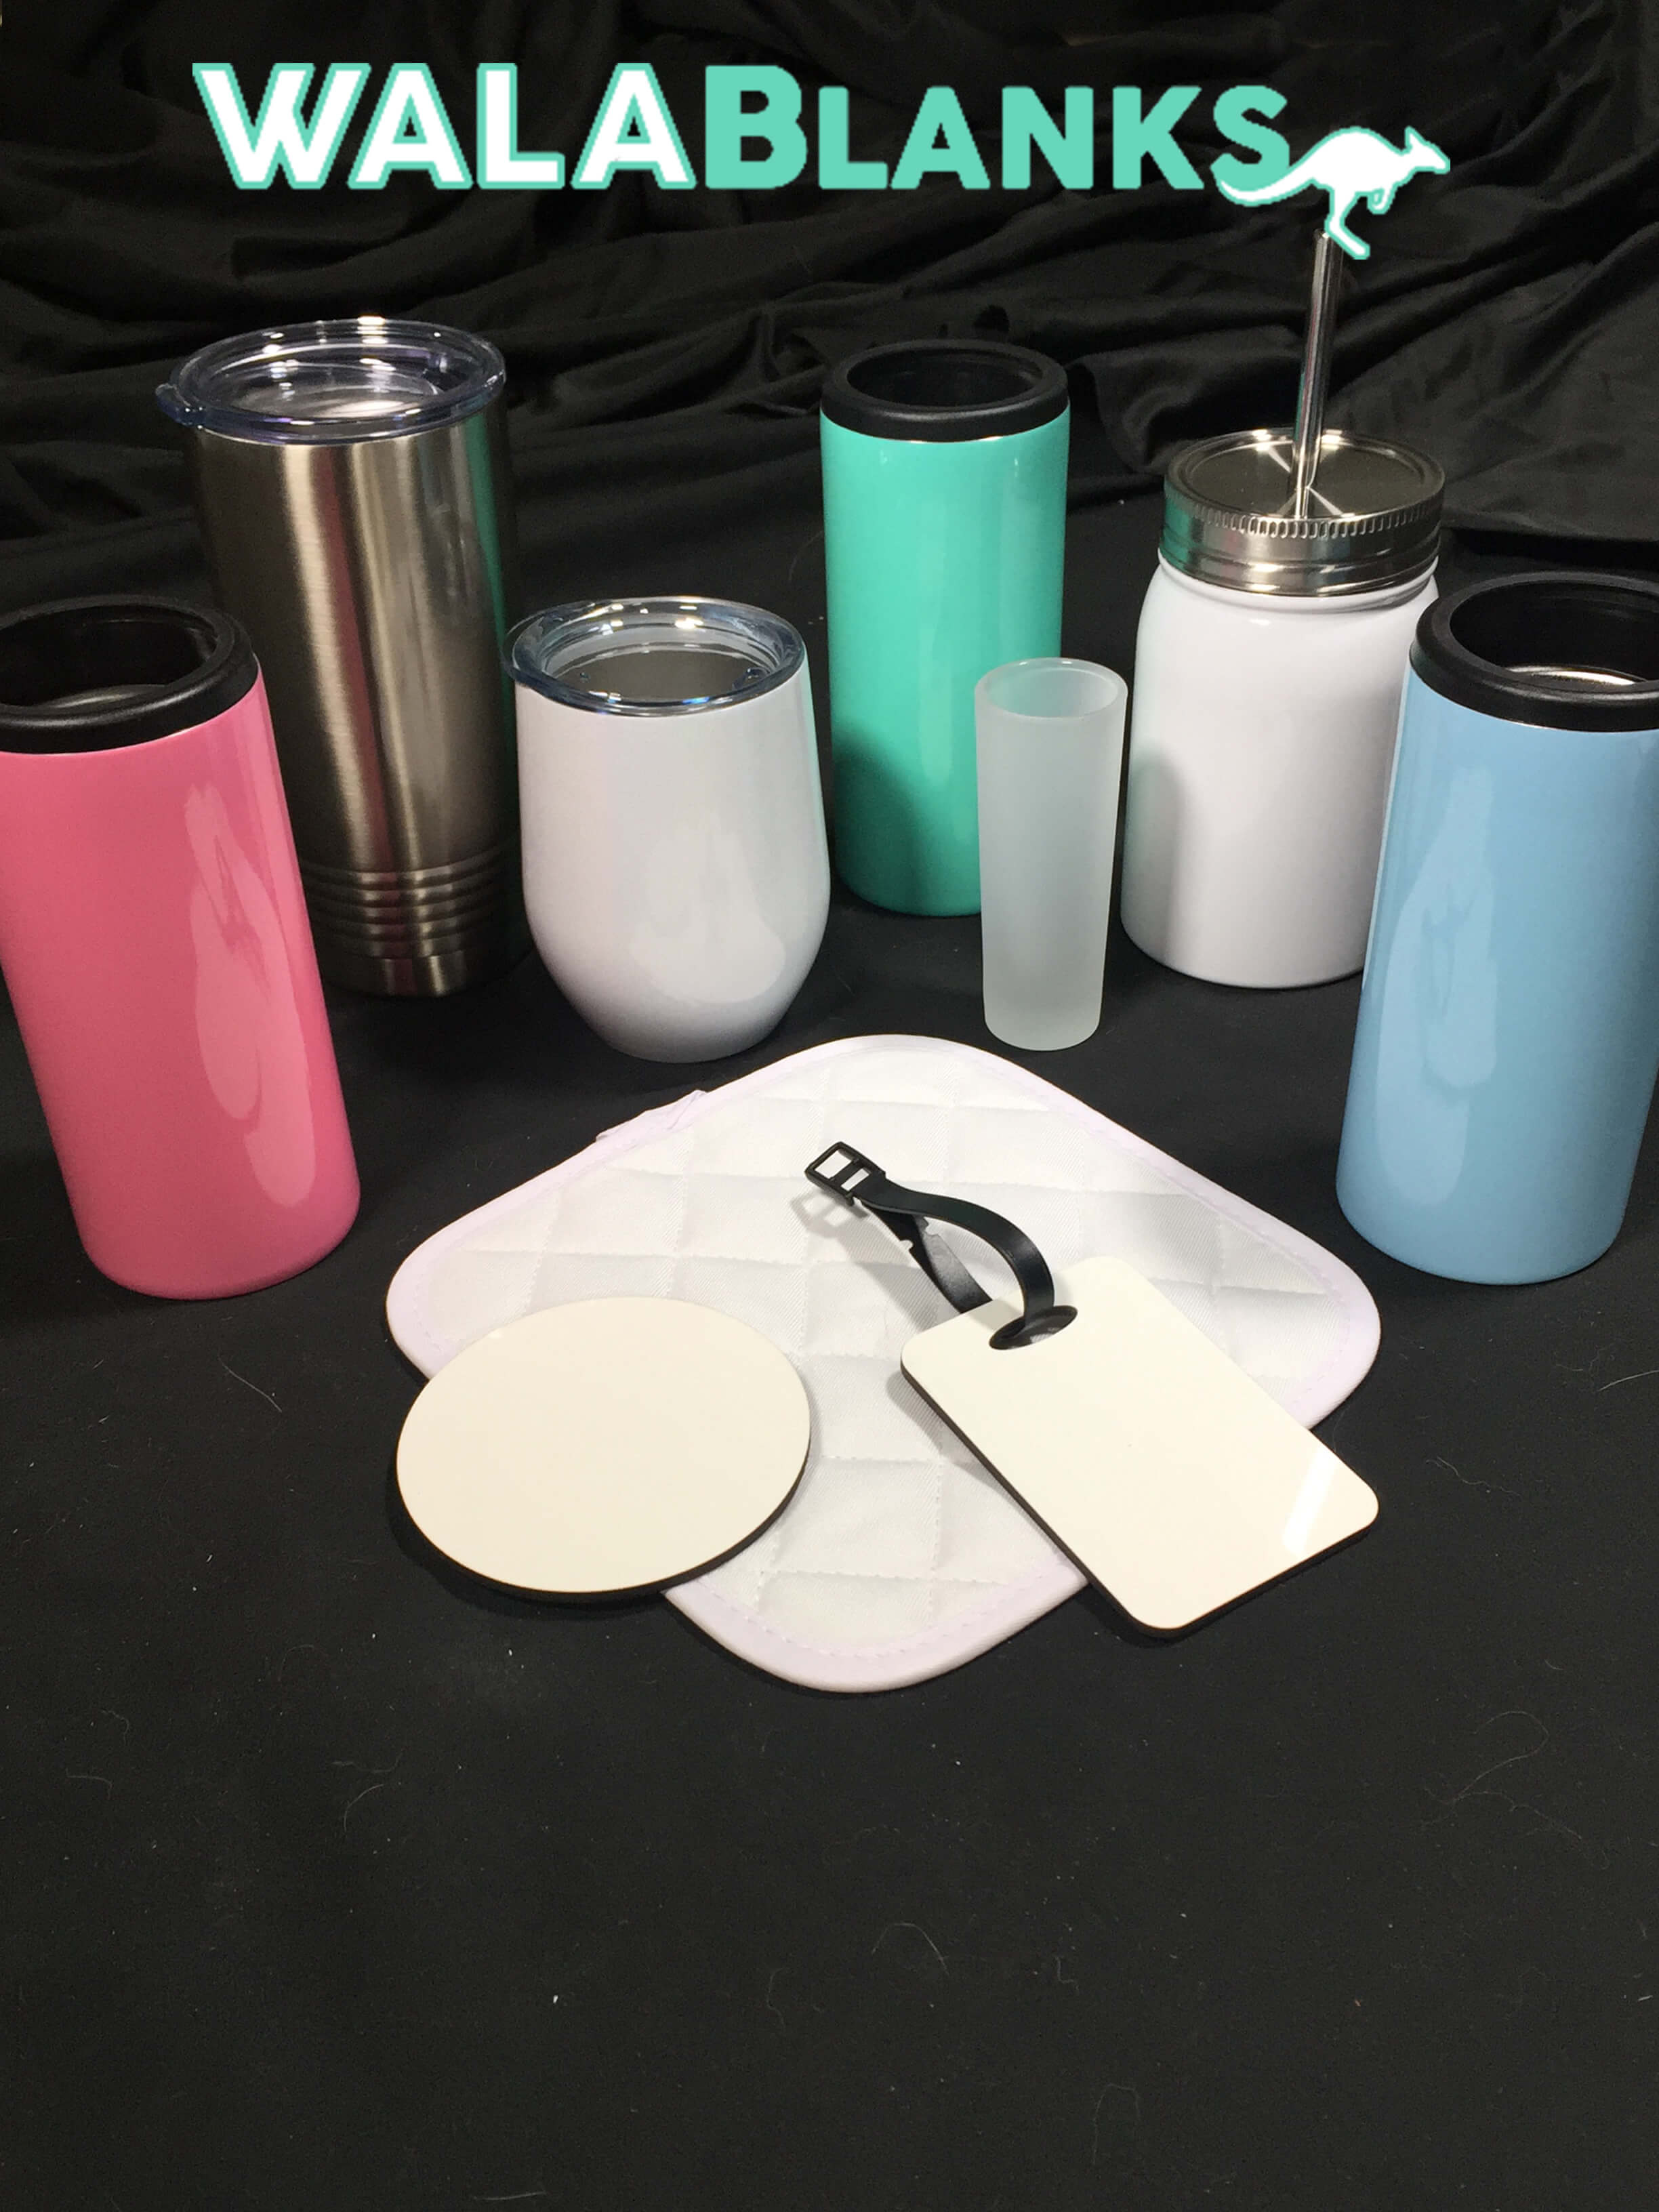 Sublimation on HTV: Which Products Work? - Angie Holden The